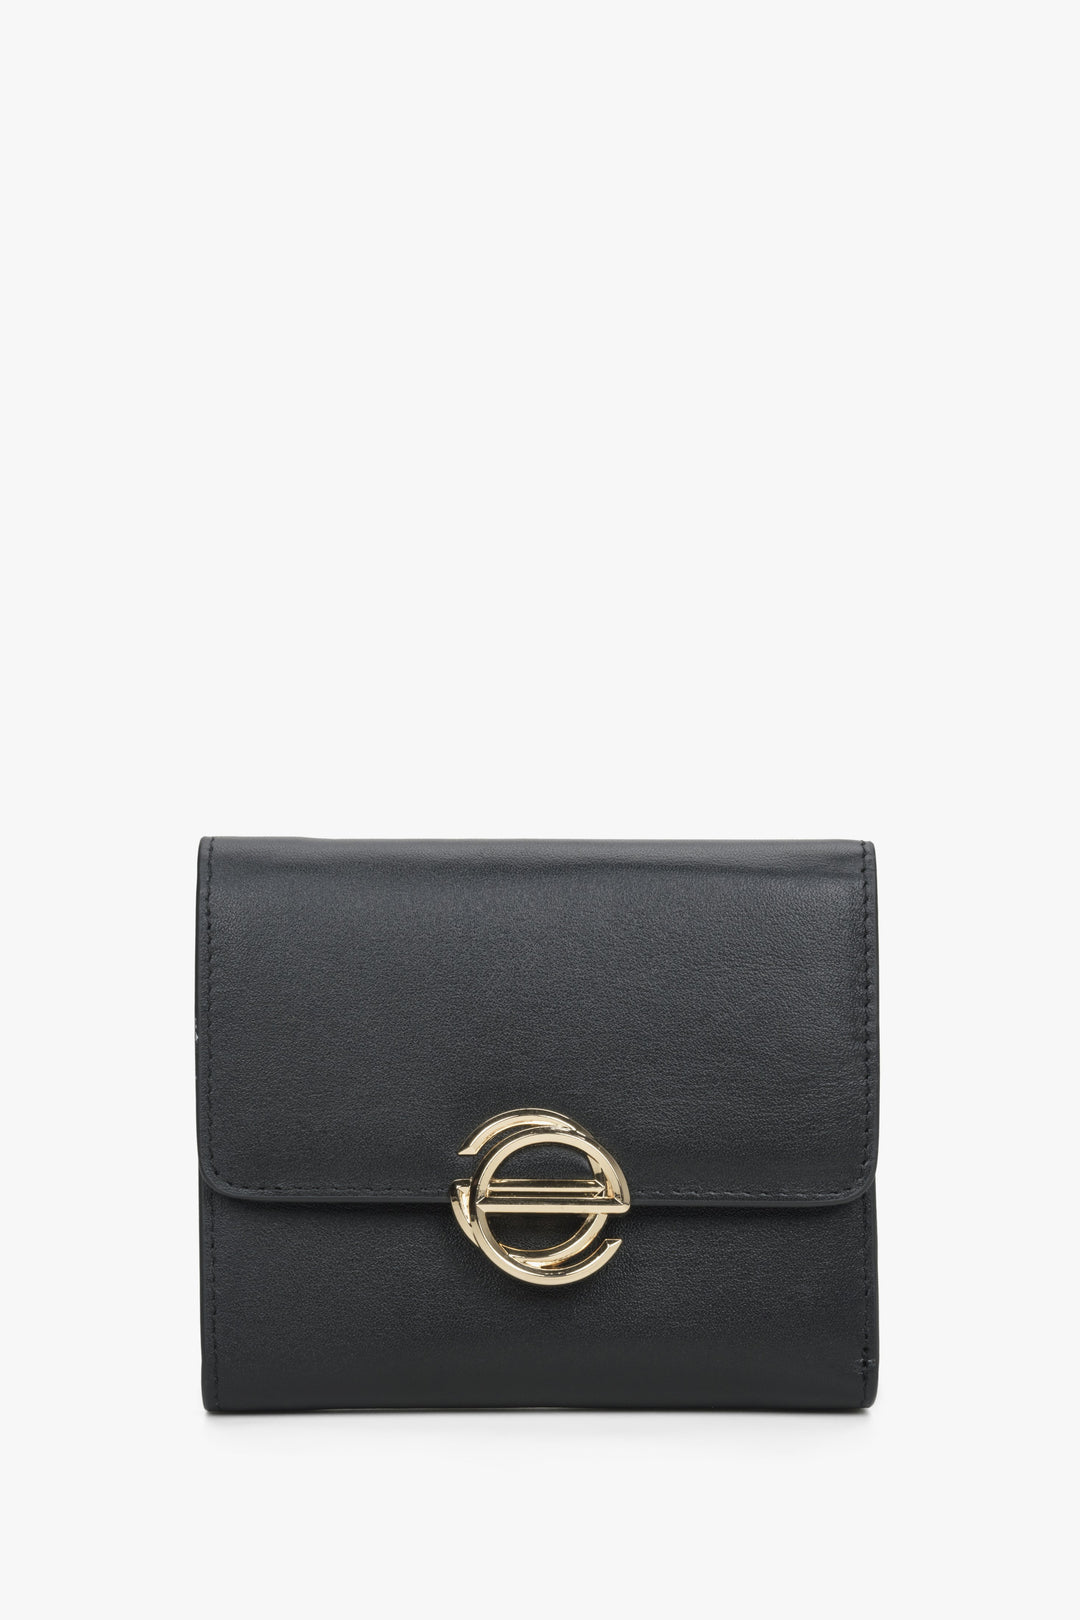 Women's Tri-Fold Small Black Wallet made of Genuine Leather with Golden Embellishments Estro ER00114473.